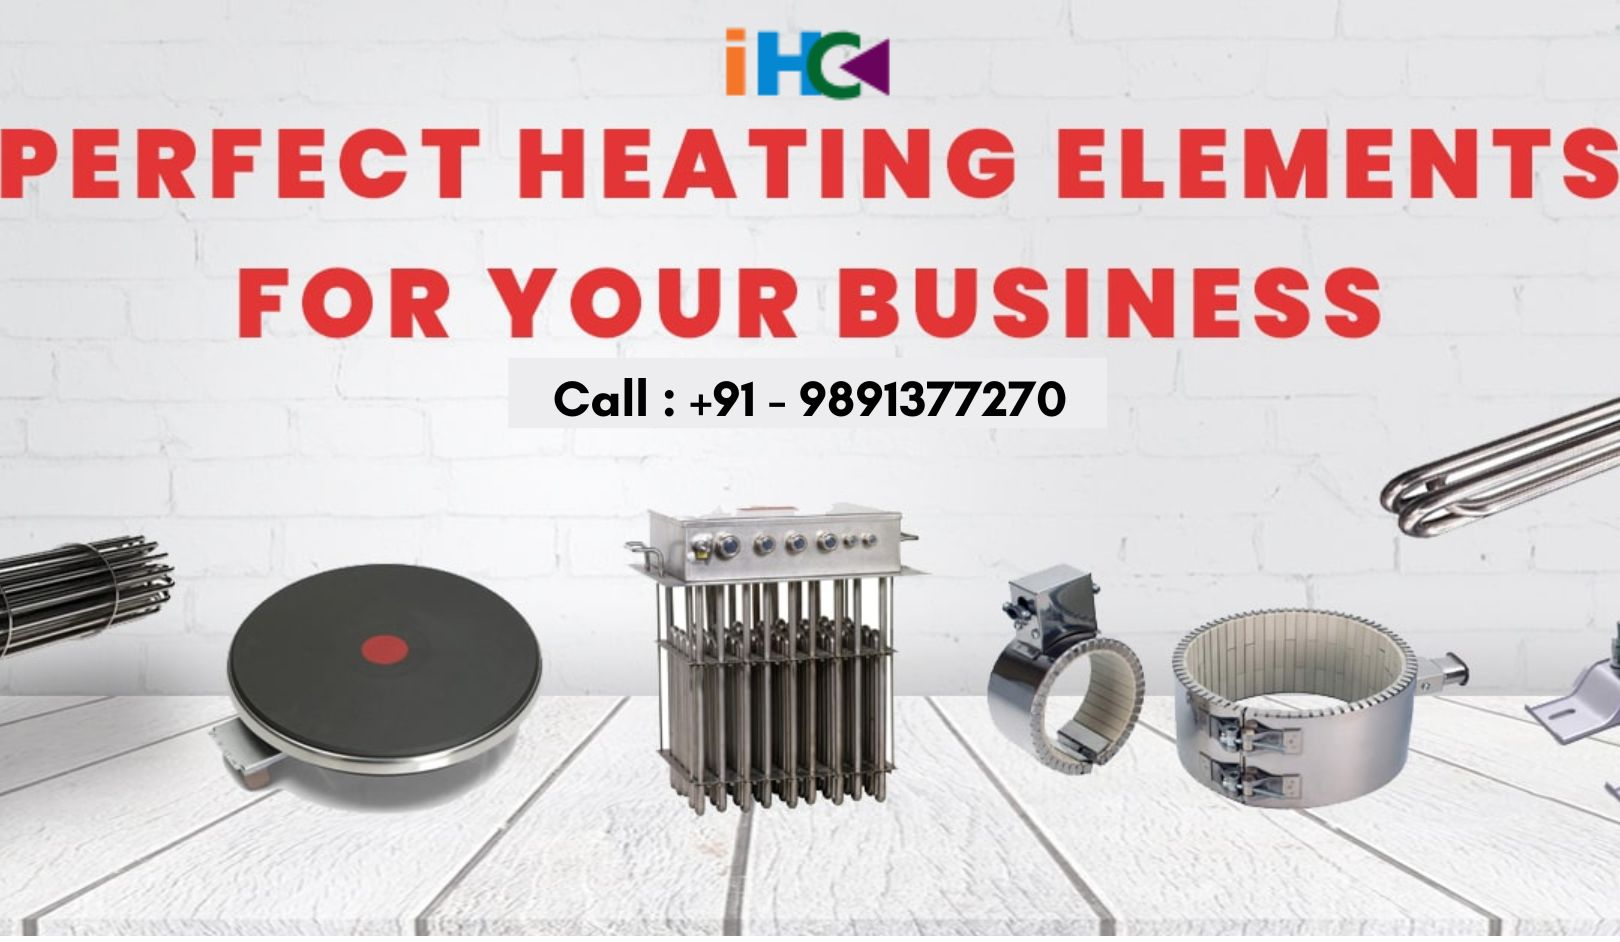 Heating Equipment & Systems Suppliers in Dubai 